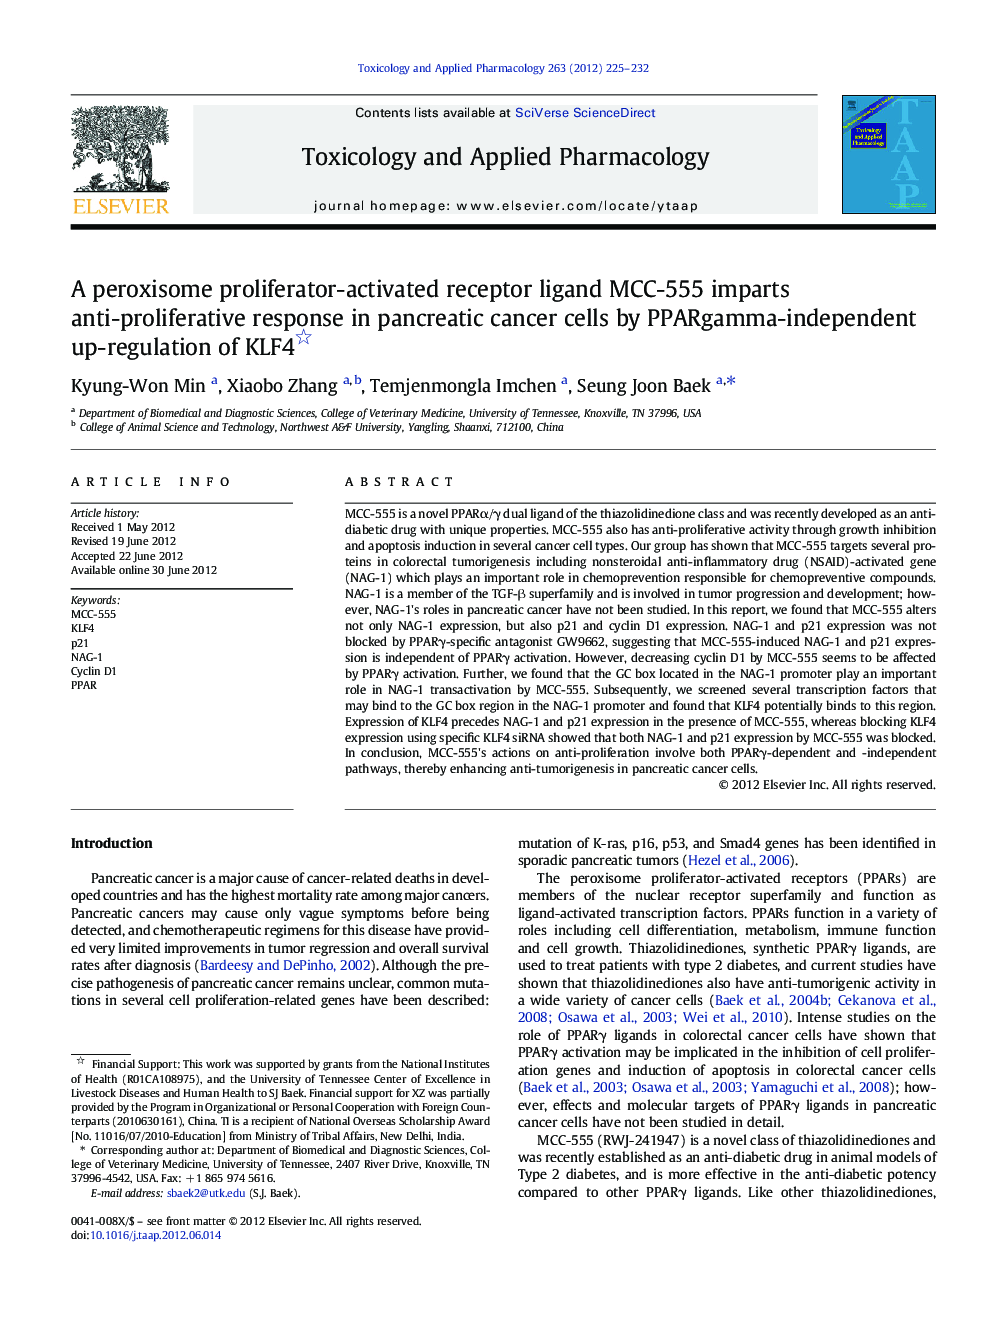 A peroxisome proliferator-activated receptor ligand MCC-555 imparts anti-proliferative response in pancreatic cancer cells by PPARgamma-independent up-regulation of KLF4